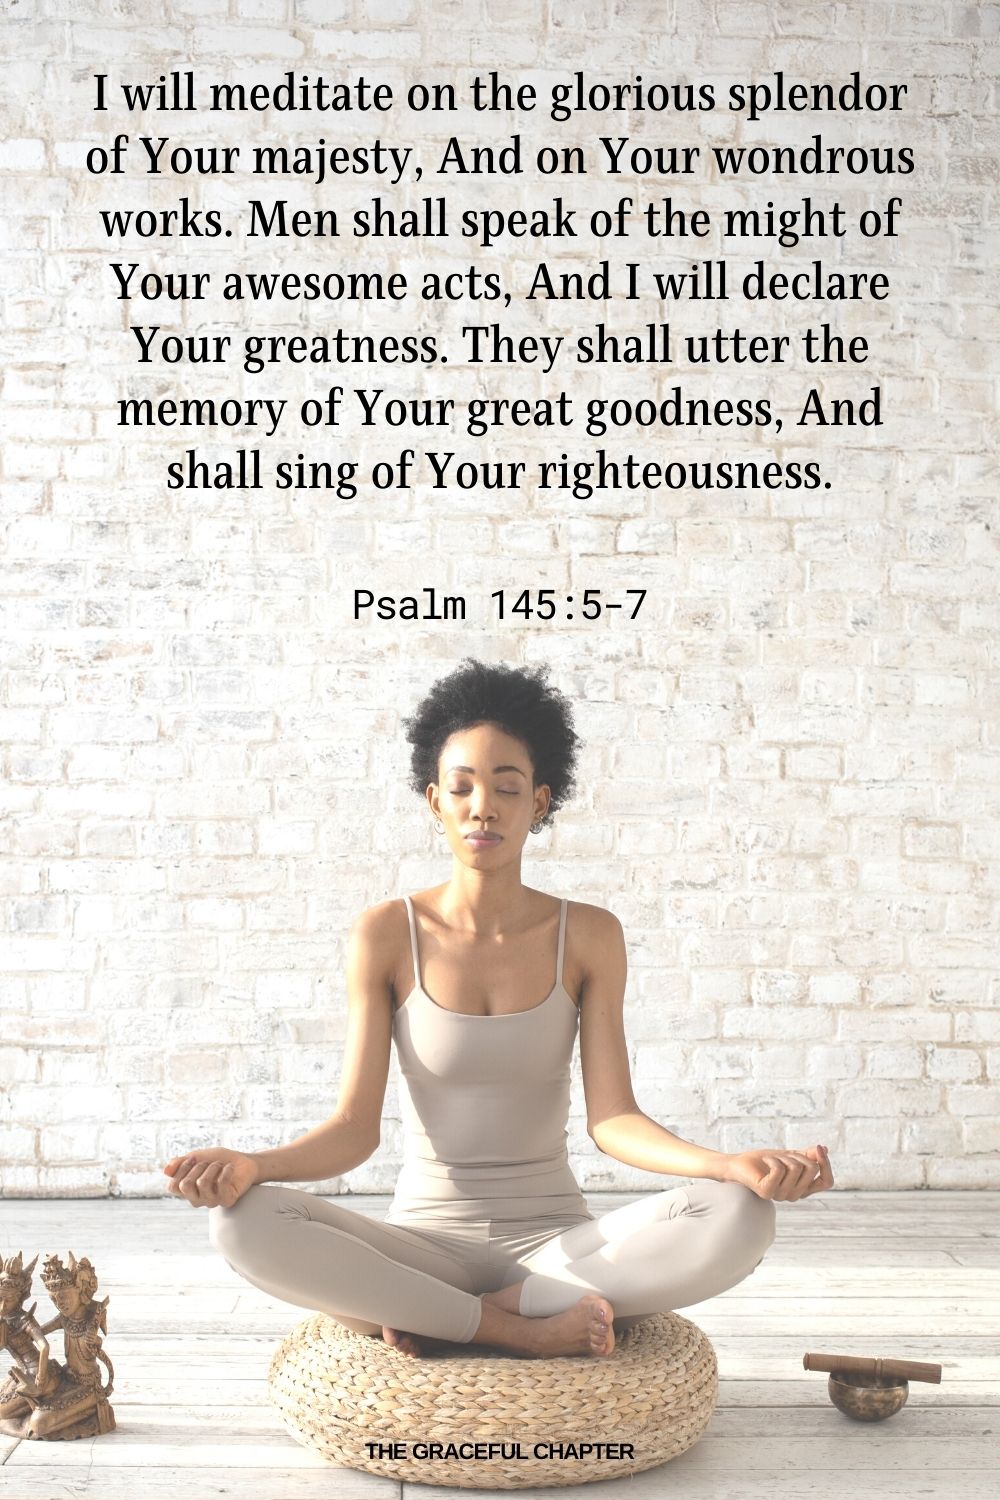 I will meditate on the glorious splendor of Your majesty, And on Your wondrous works. Men shall speak of the might of Your awesome acts, And I will declare Your greatness. They shall utter the memory of Your great goodness, And shall sing of Your righteousness. Psalm 145:5-7